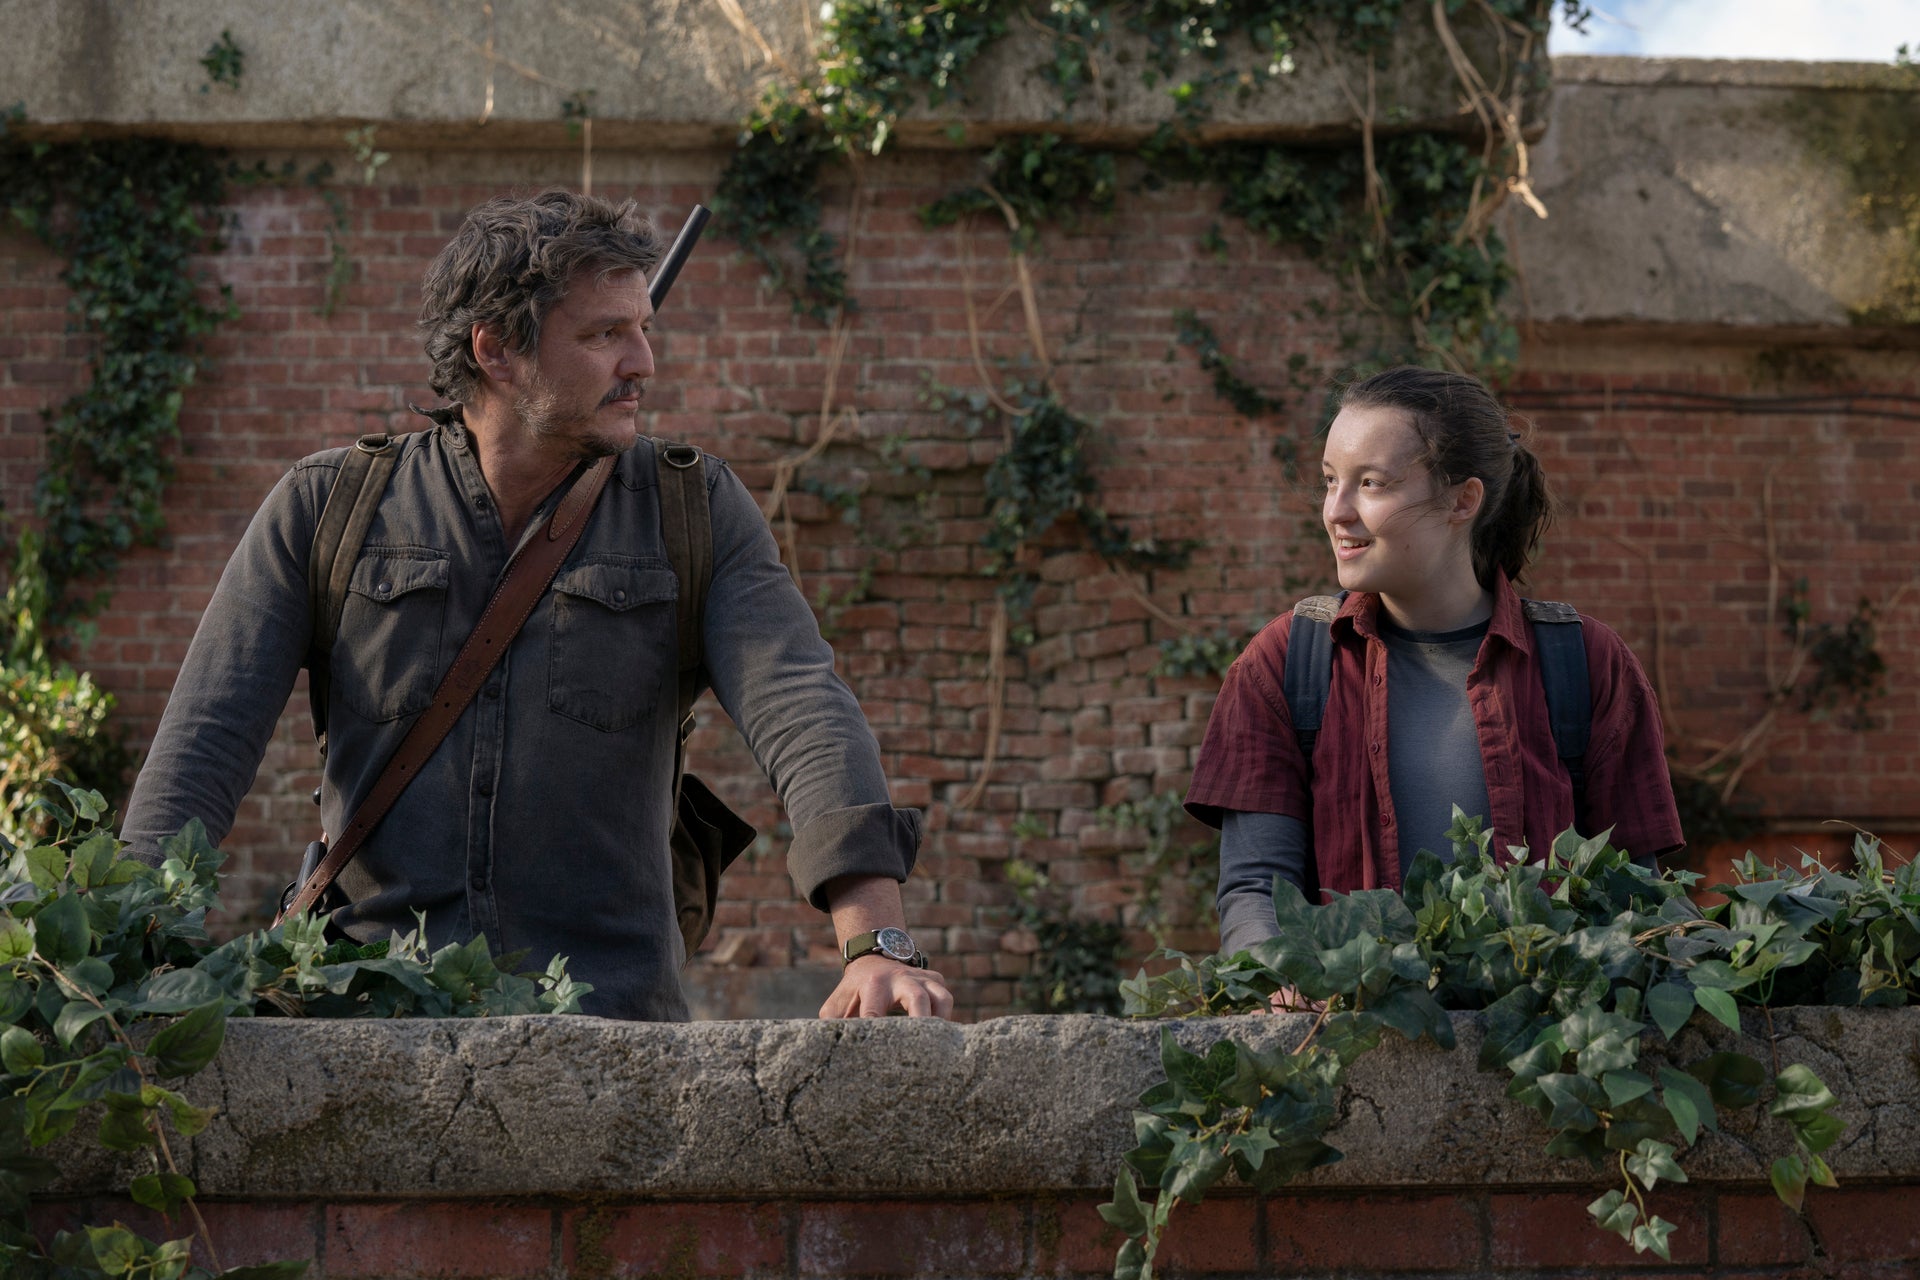 Unlikely duo Pedro Pascal and Bella Ramsey in ‘The Last of Us’